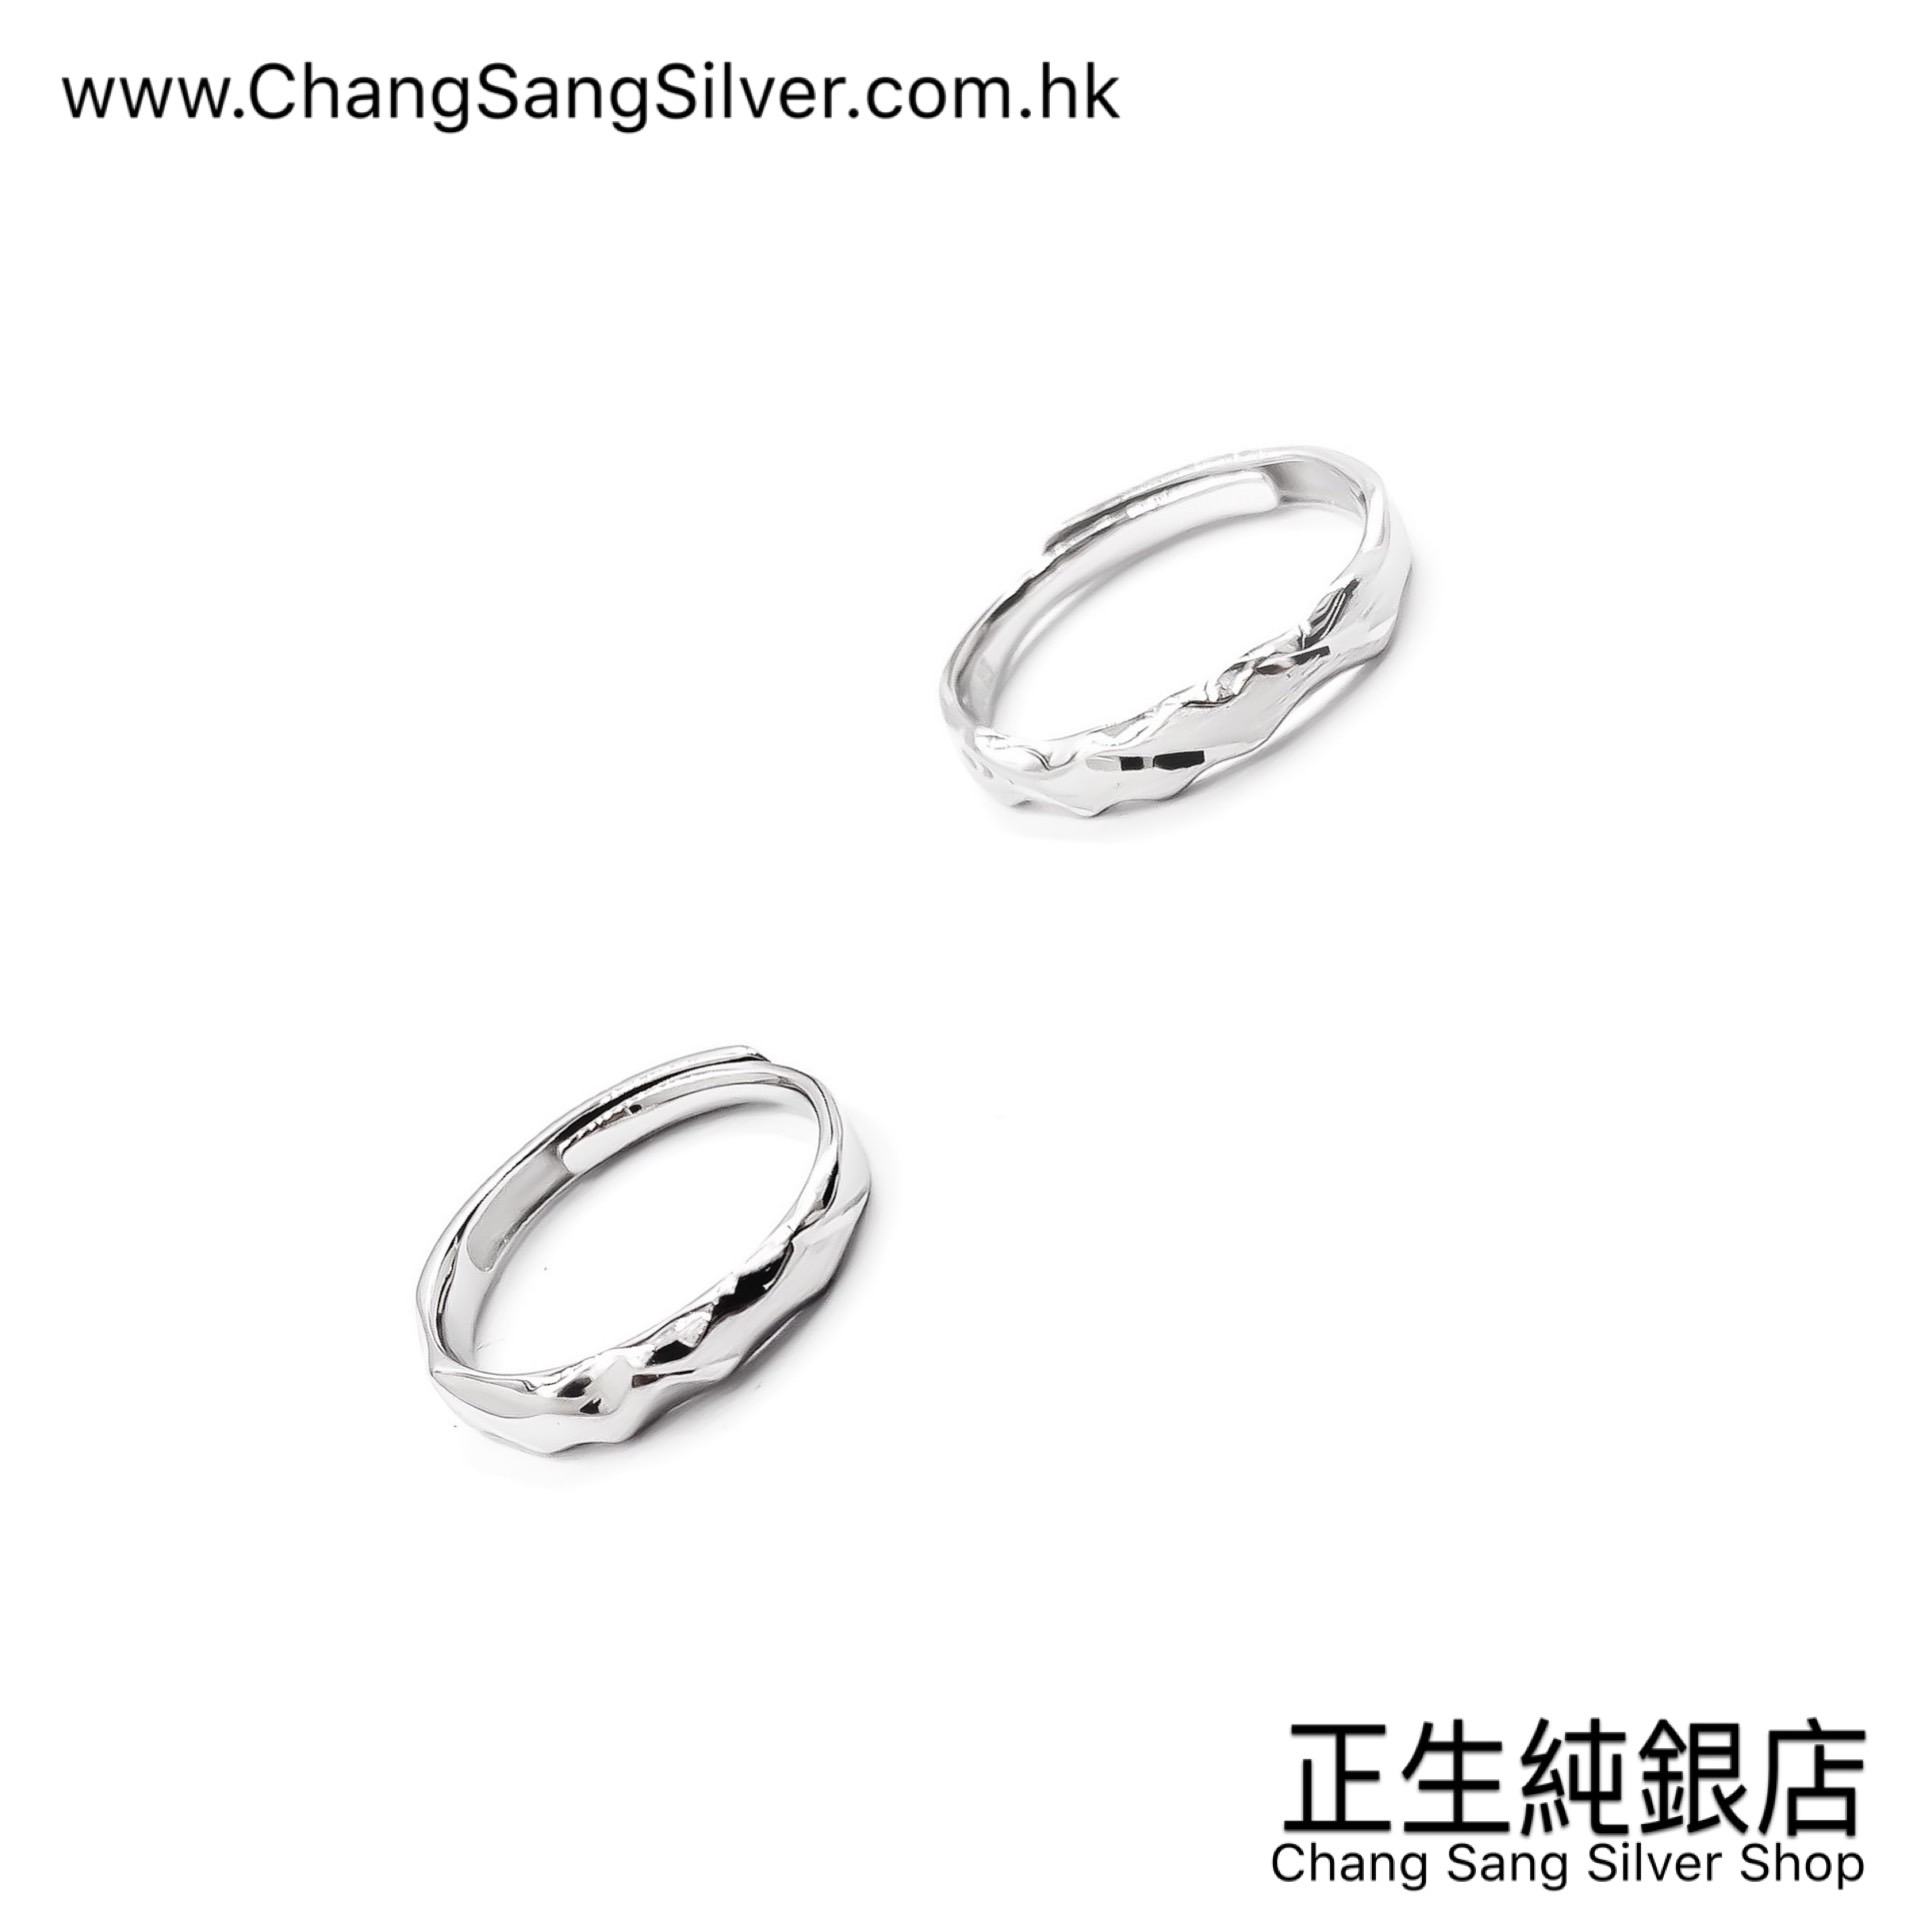 LOVERS RING SERIES 情侶戒指系列 (25)